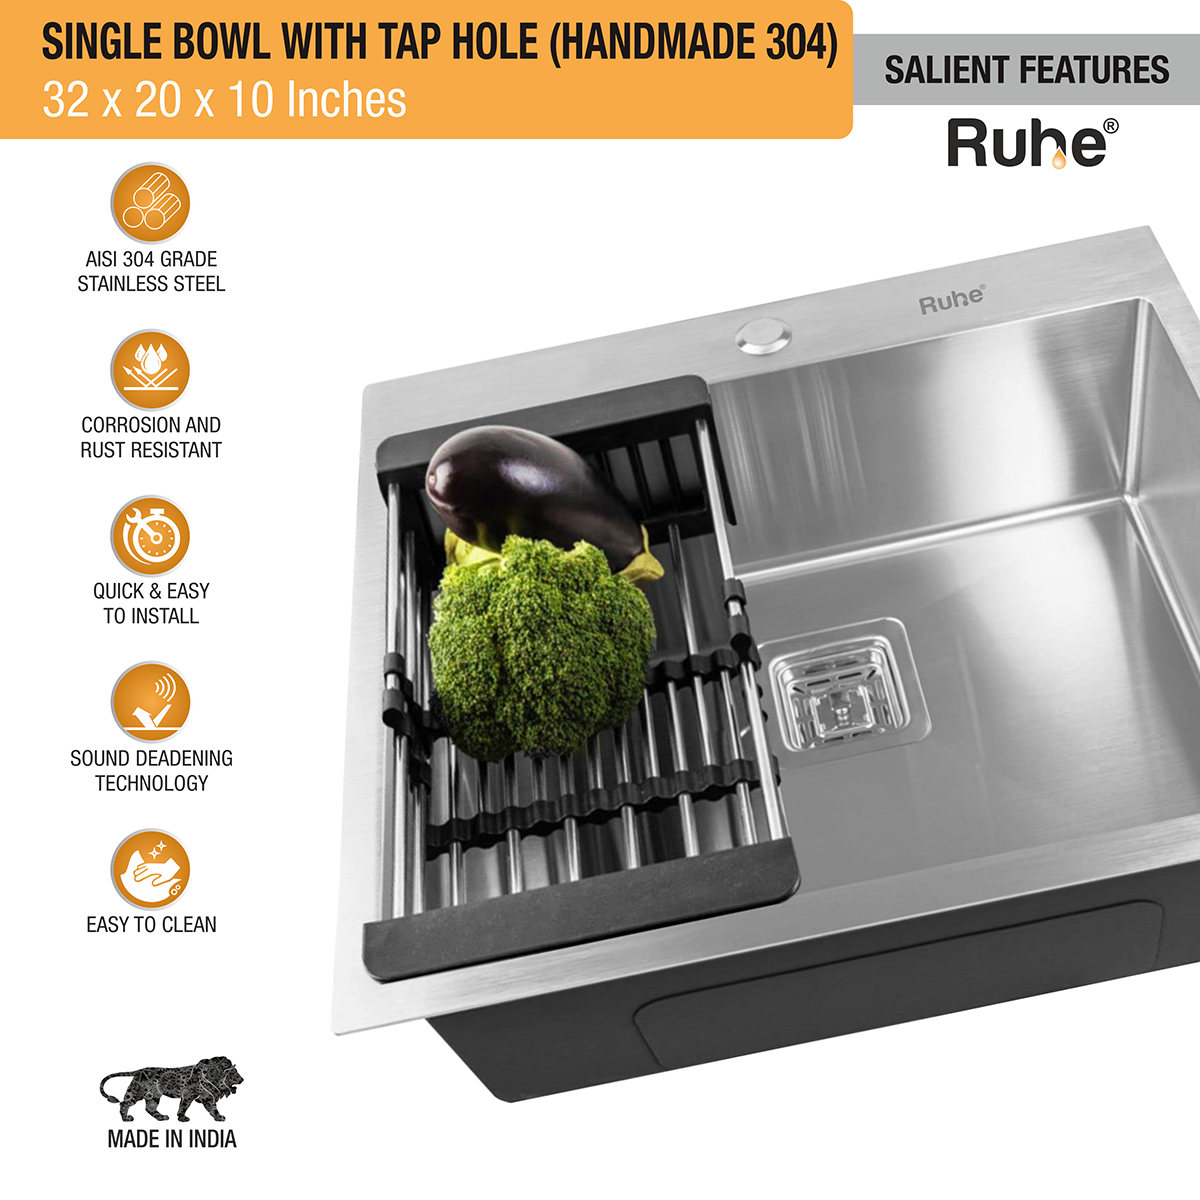 Handmade Single Bowl 304-Grade Kitchen Sink (32 x 20 x 10 Inches) with Tap Hole features and benefits